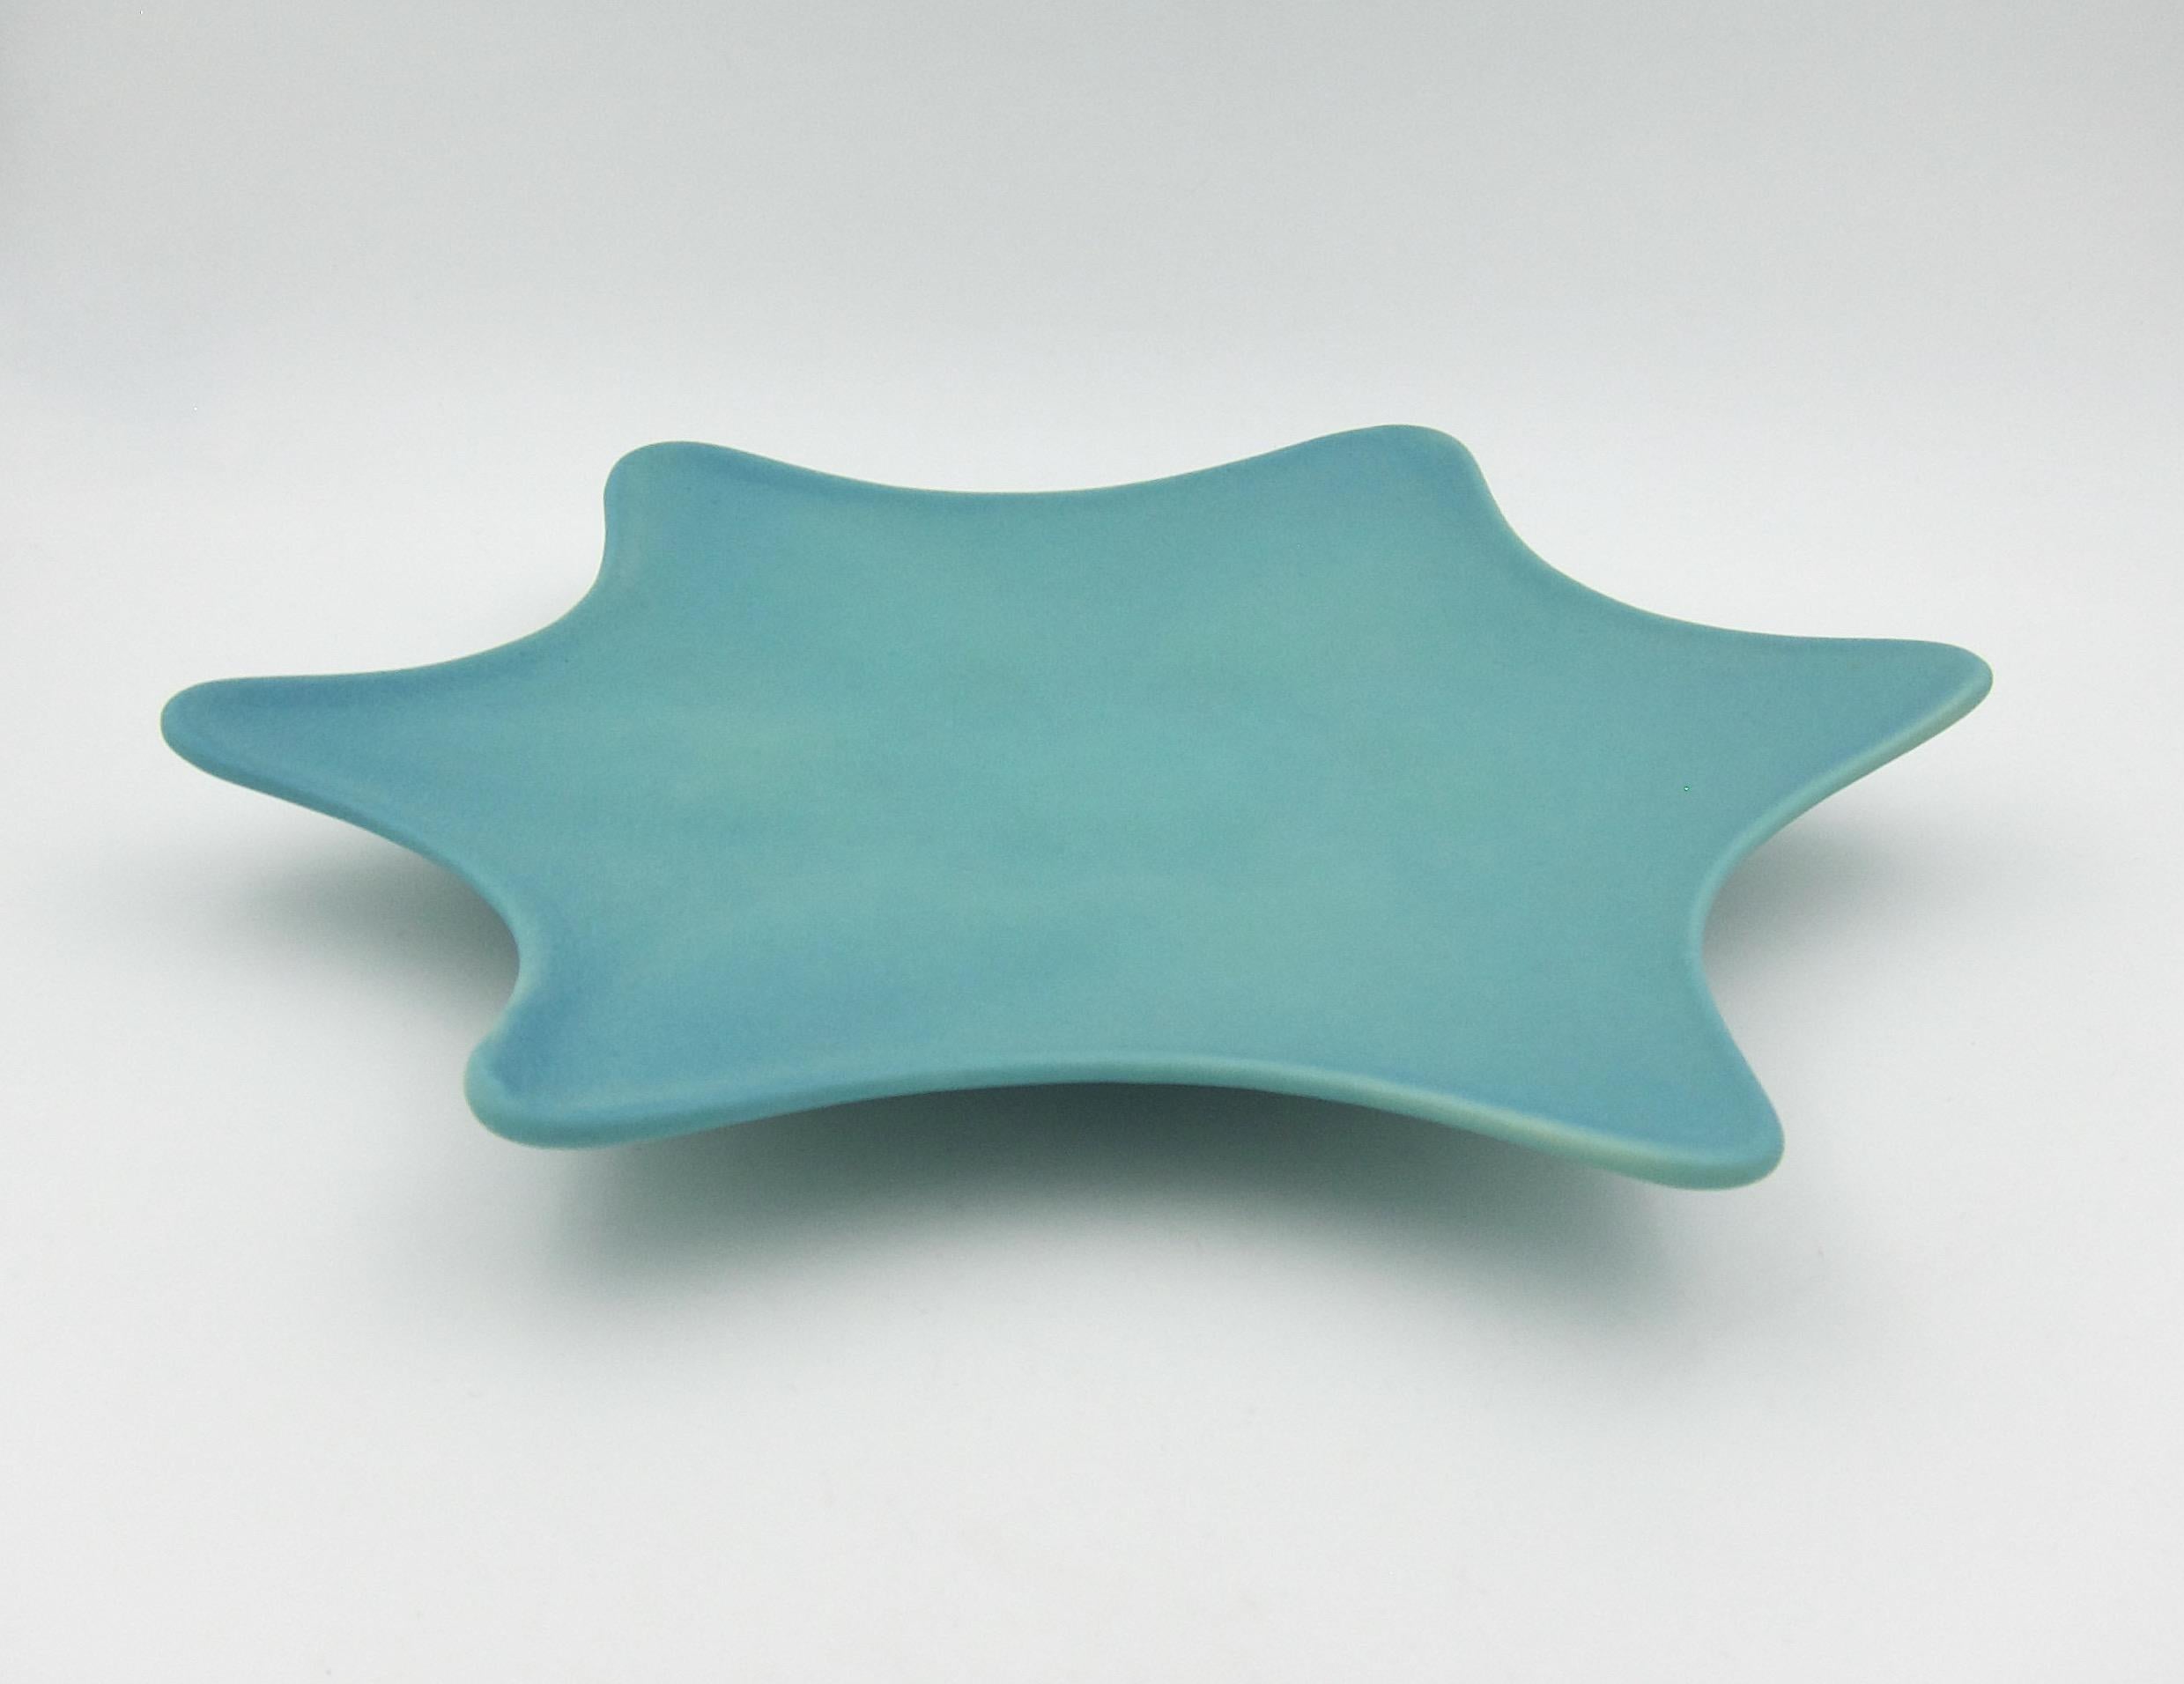 A vintage serving tray or platter from Van Briggle Pottery of Colorado Springs, dating circa 1970s. The vintage art pottery tray in a matte turquoise blue green glaze is shaped like a biomorphic six-pointed star, resting on a circular foot inscribed